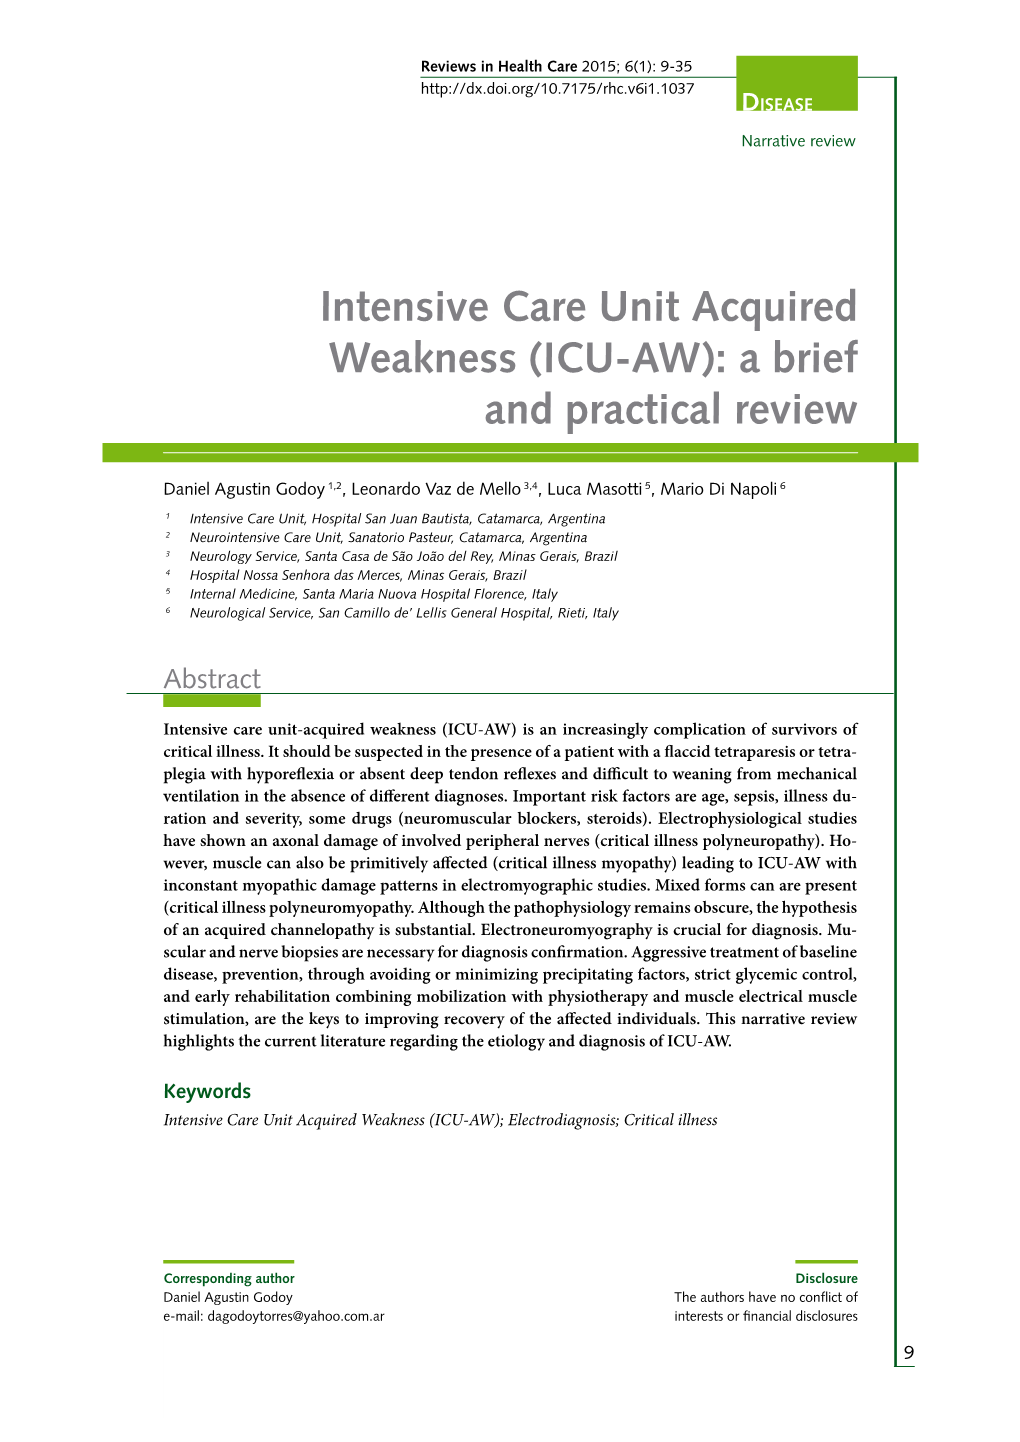 Intensive Care Unit Acquired Weakness (ICU‑AW): a Brief and Practical Review